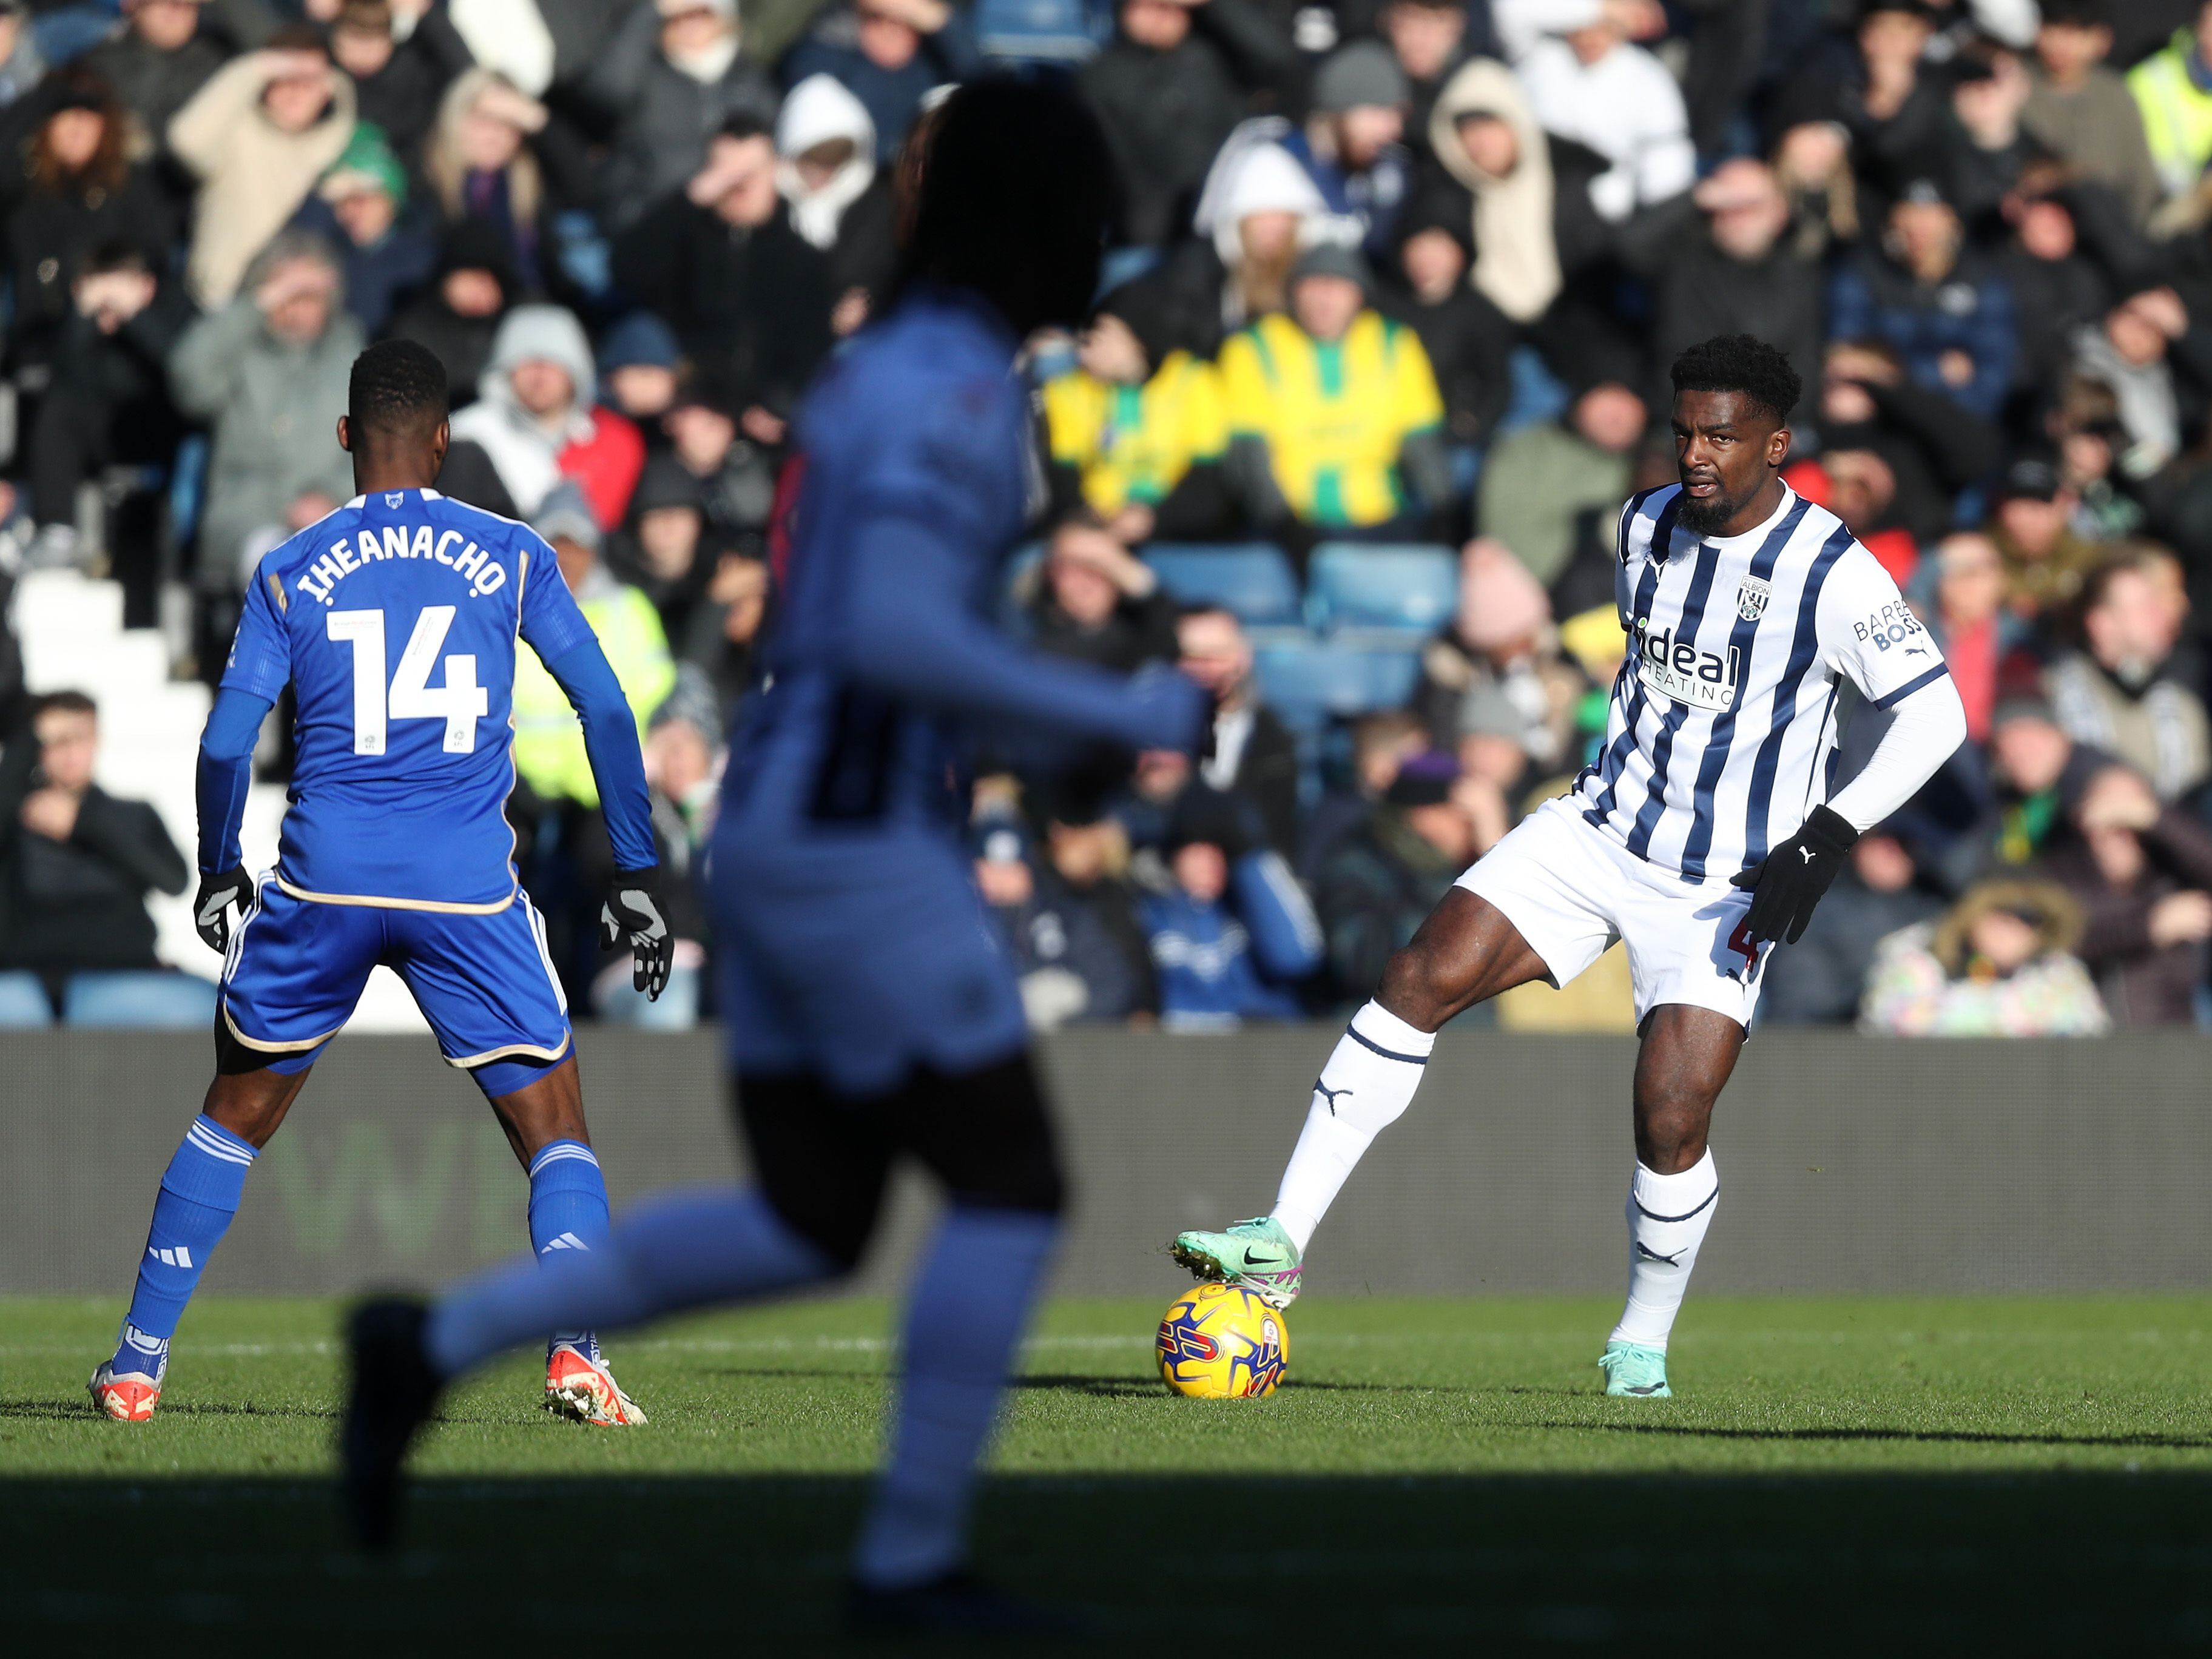 West Brom 1 Leicester 2: player ratings - Cedric Kipre shines again as comeback continues